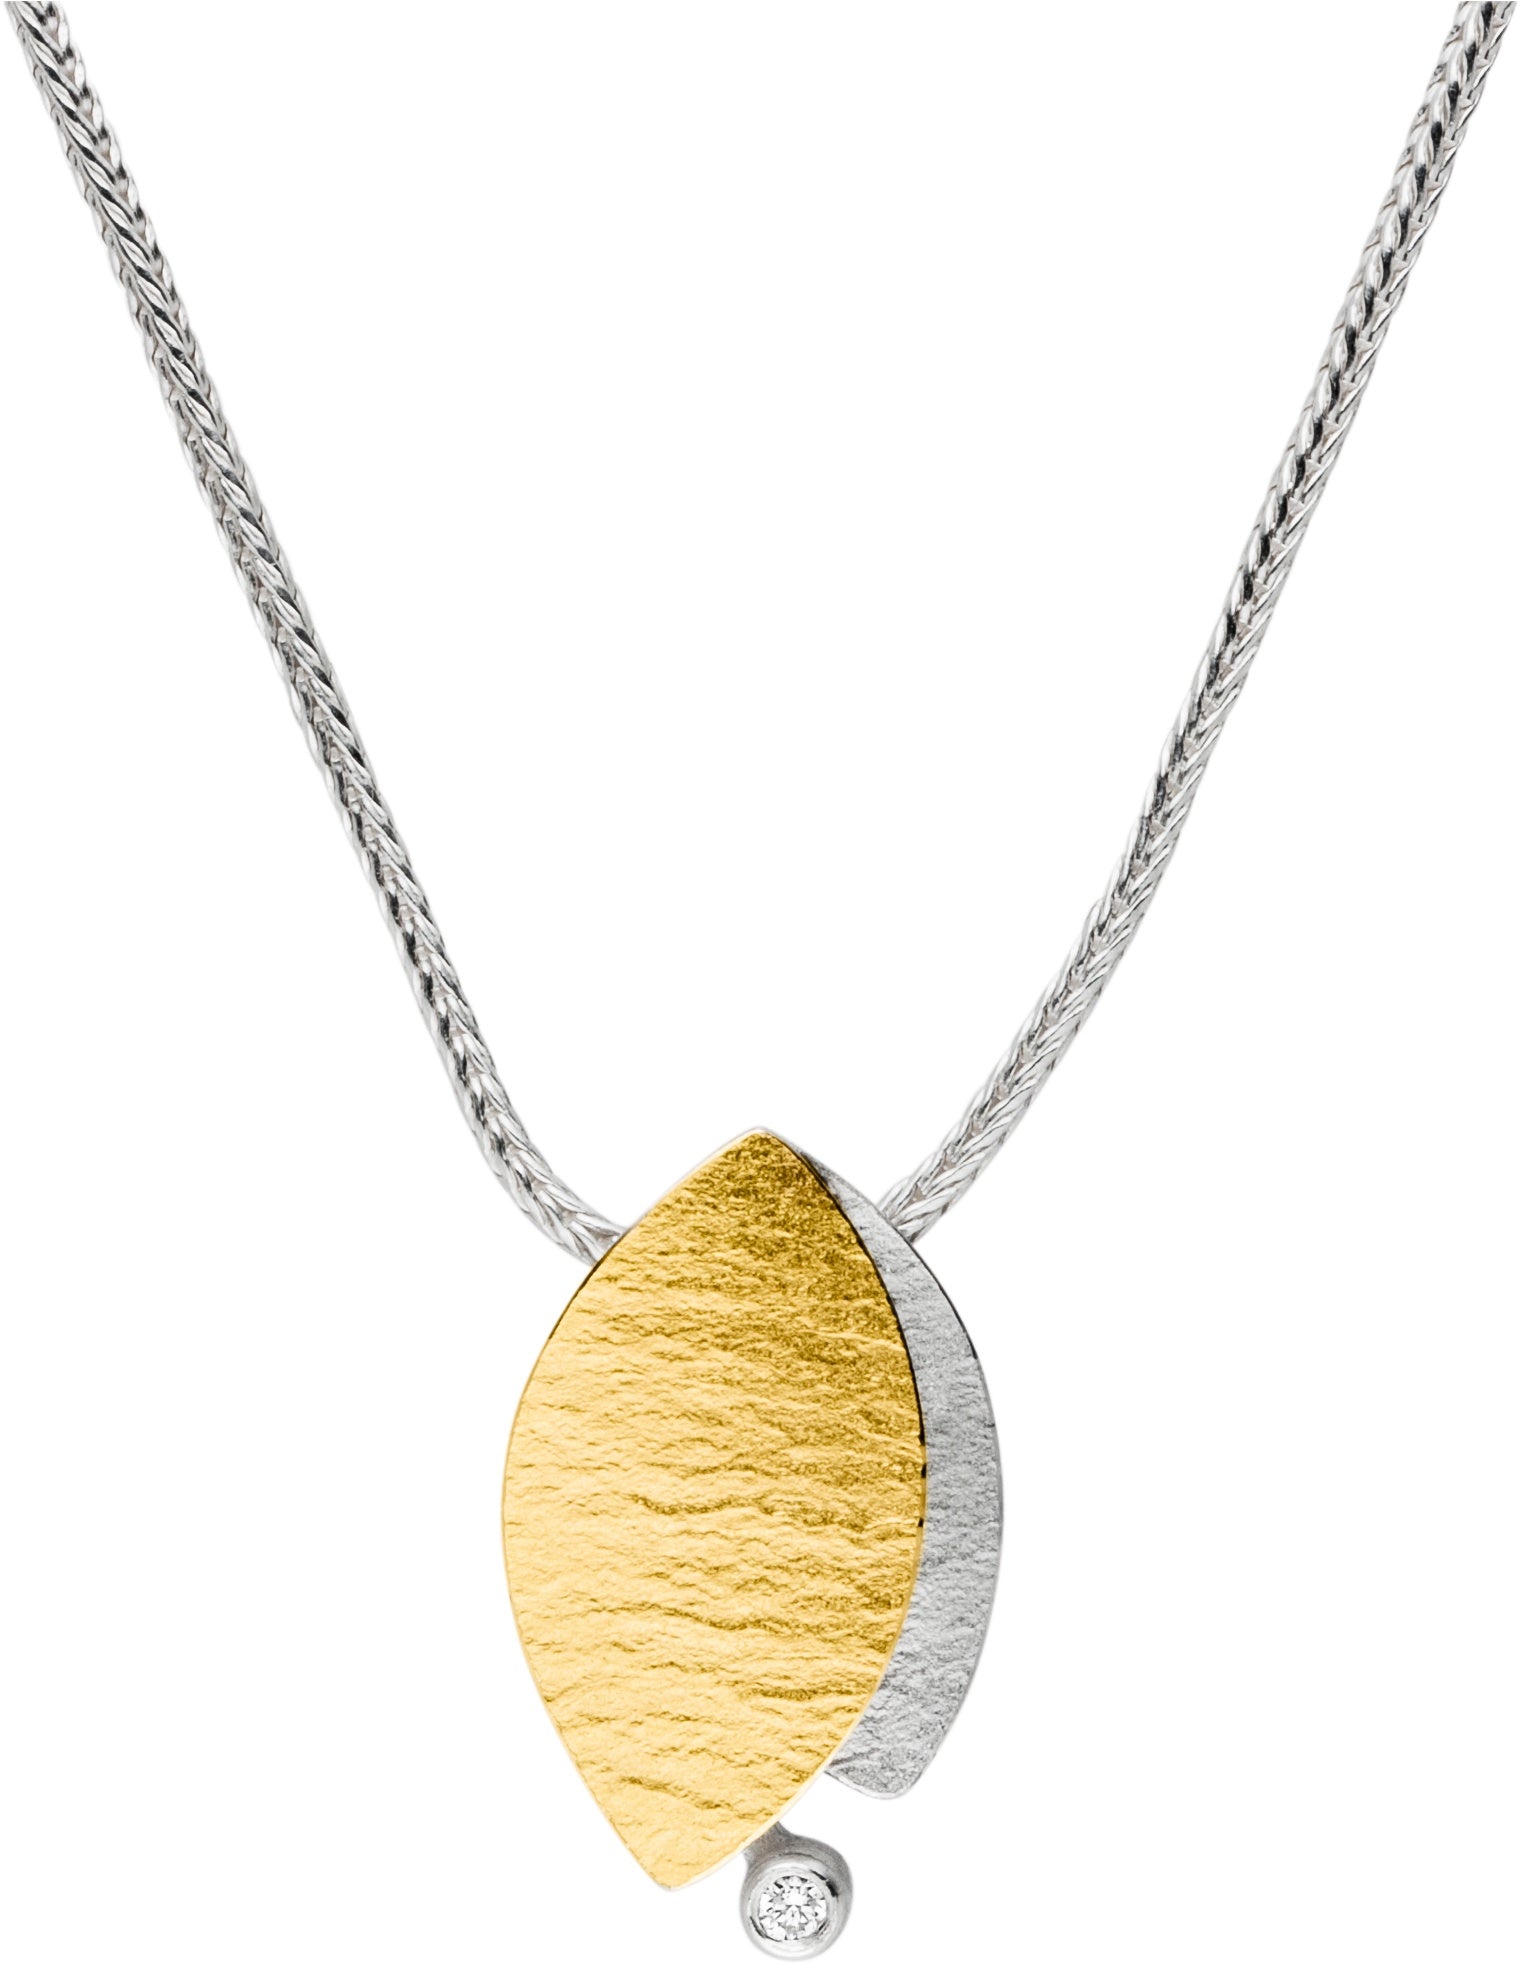 Silver & Gold Leaf Necklace with Diamond